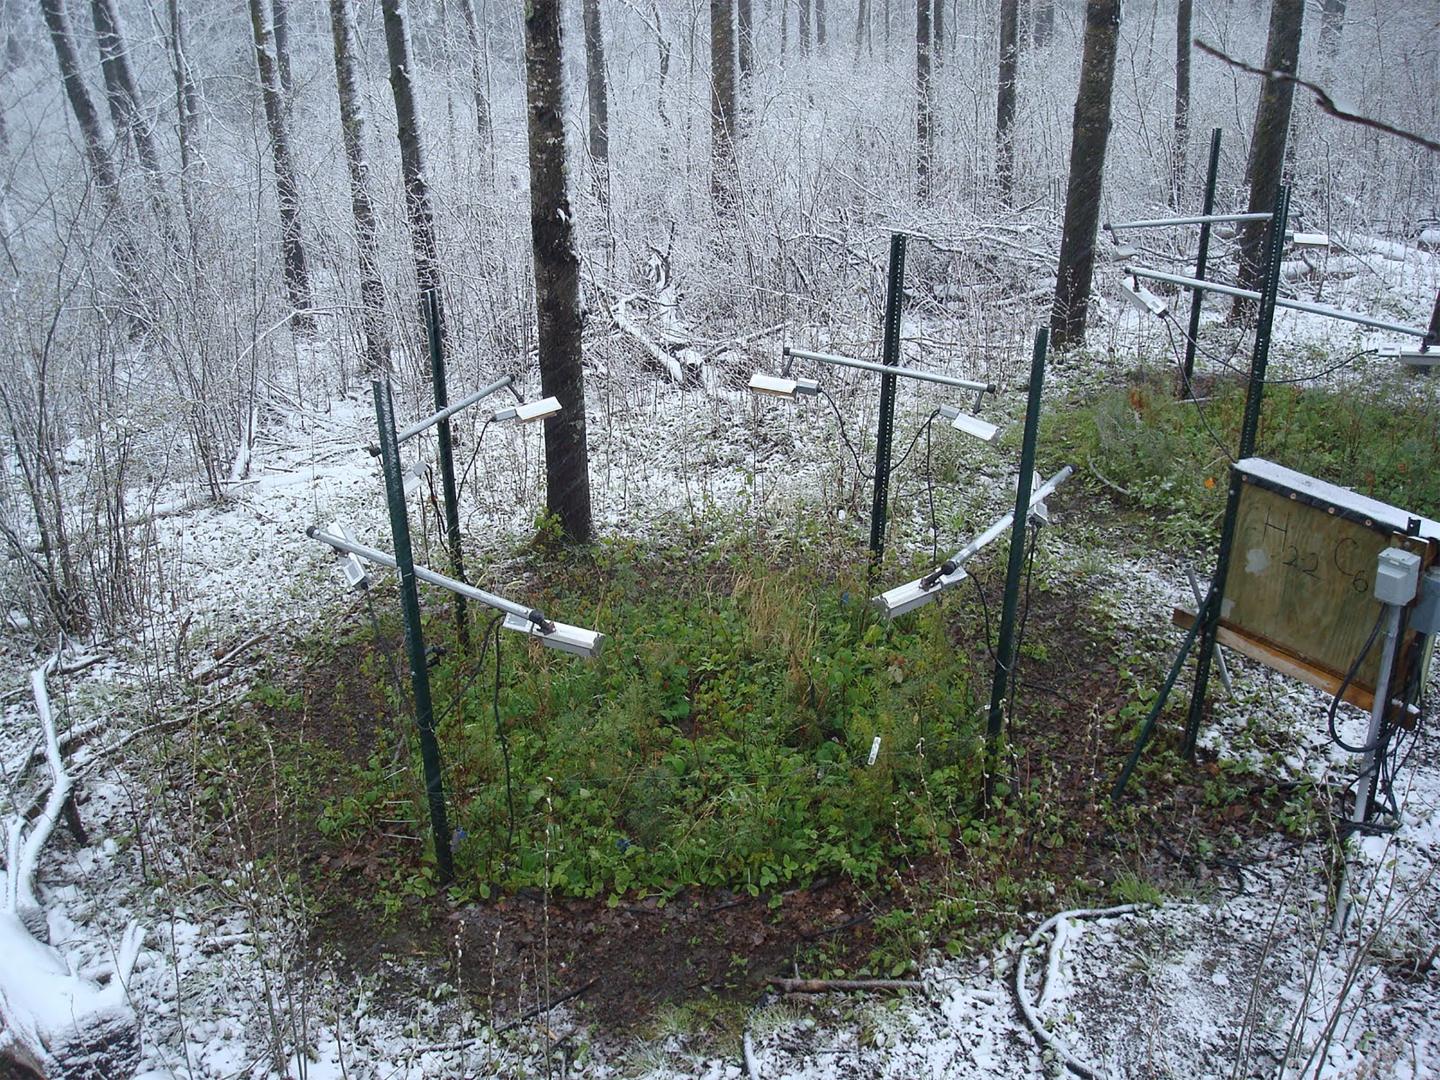 Early Leafing in Warmed Plots Compared to the Surrounding Forest. Late Spring Snow Shower Accentuate